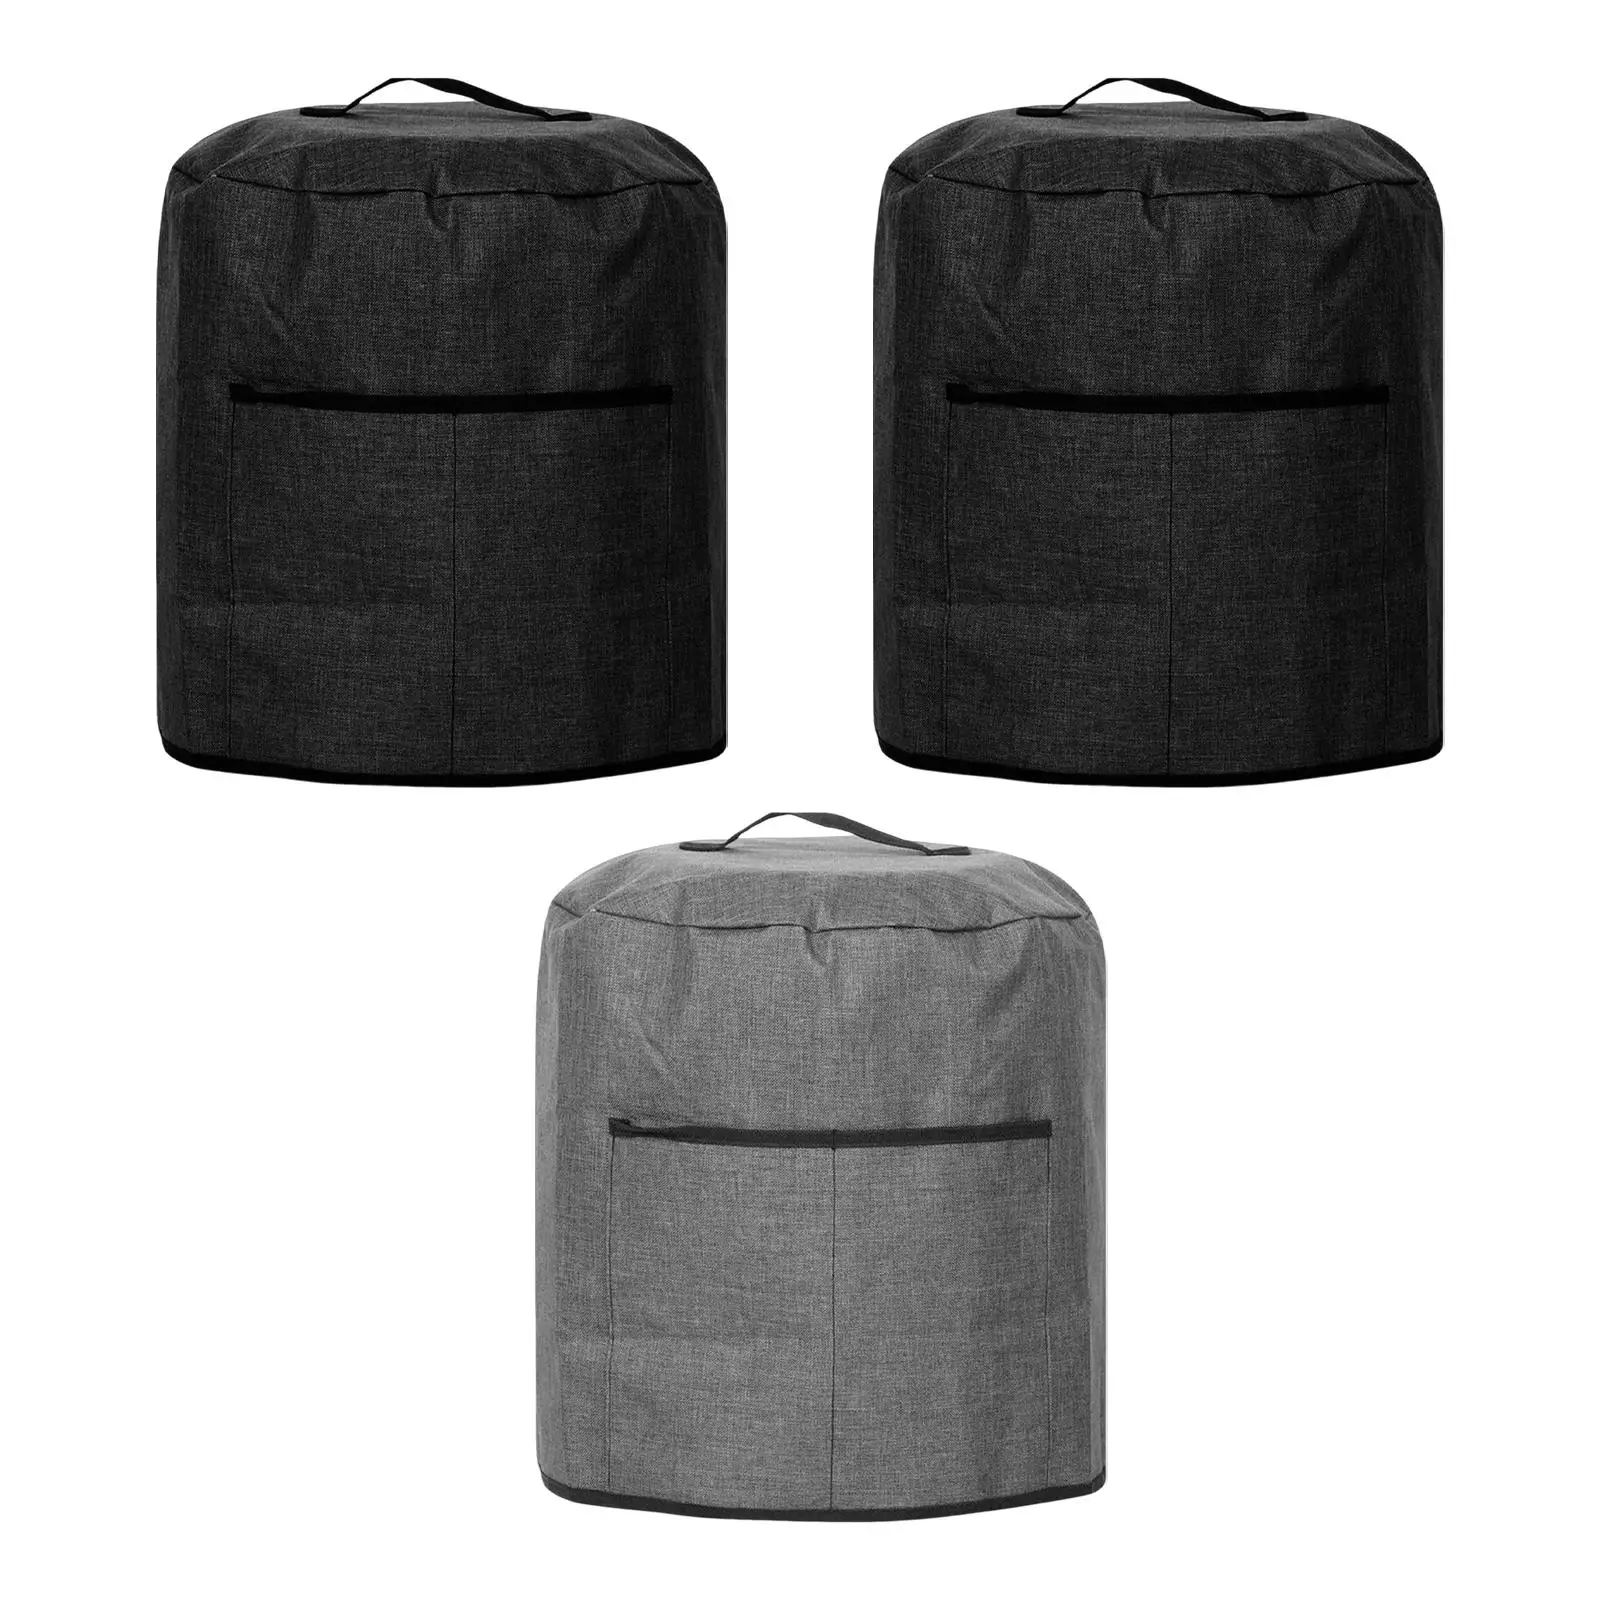 

Air Fryer Dust Cover Restaurant easy to Clean Lightweight Household Storage Pockets for Cooker Air Fryer Cookware Pot Oven